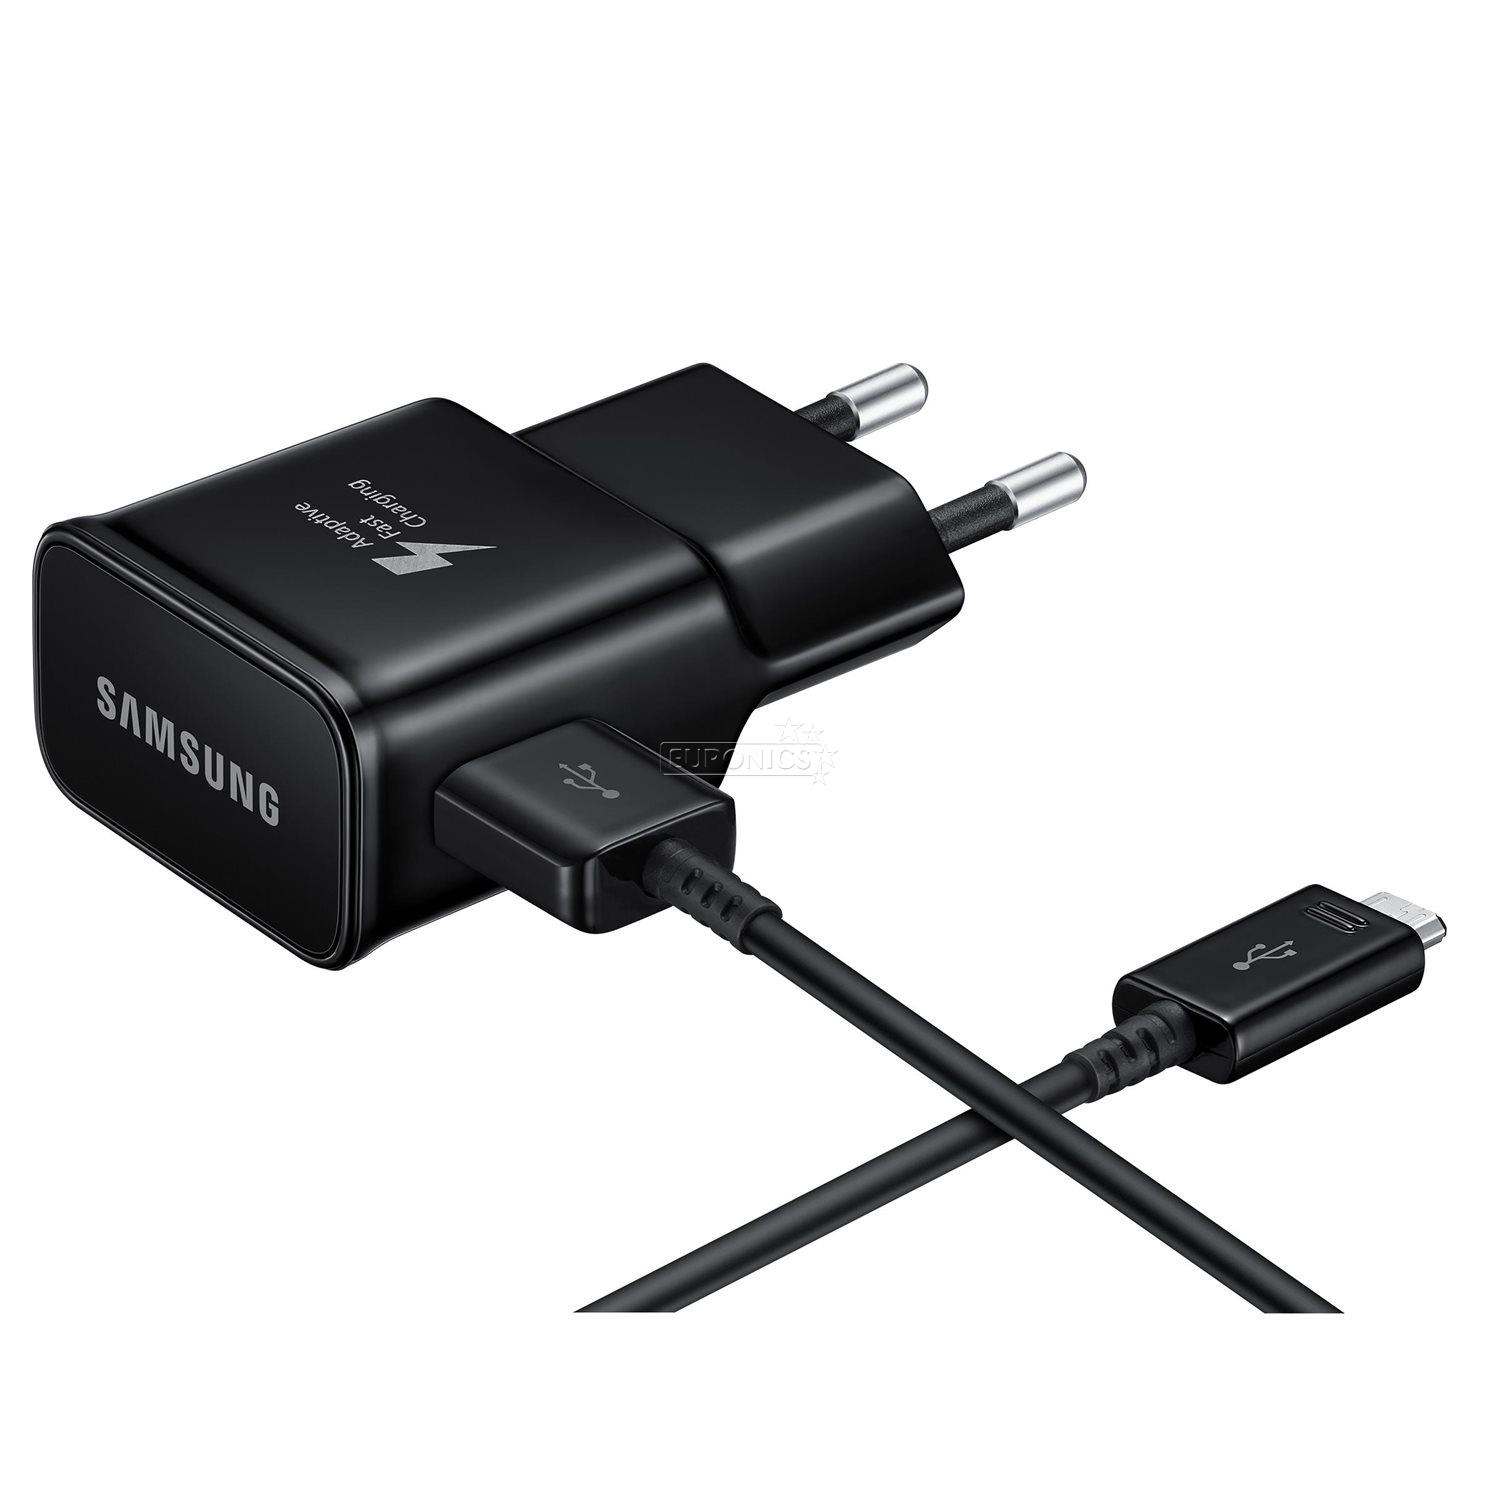 Charger Fast charge, Samsung / 15W, USB Type-C, EP-TA20EBECGWW